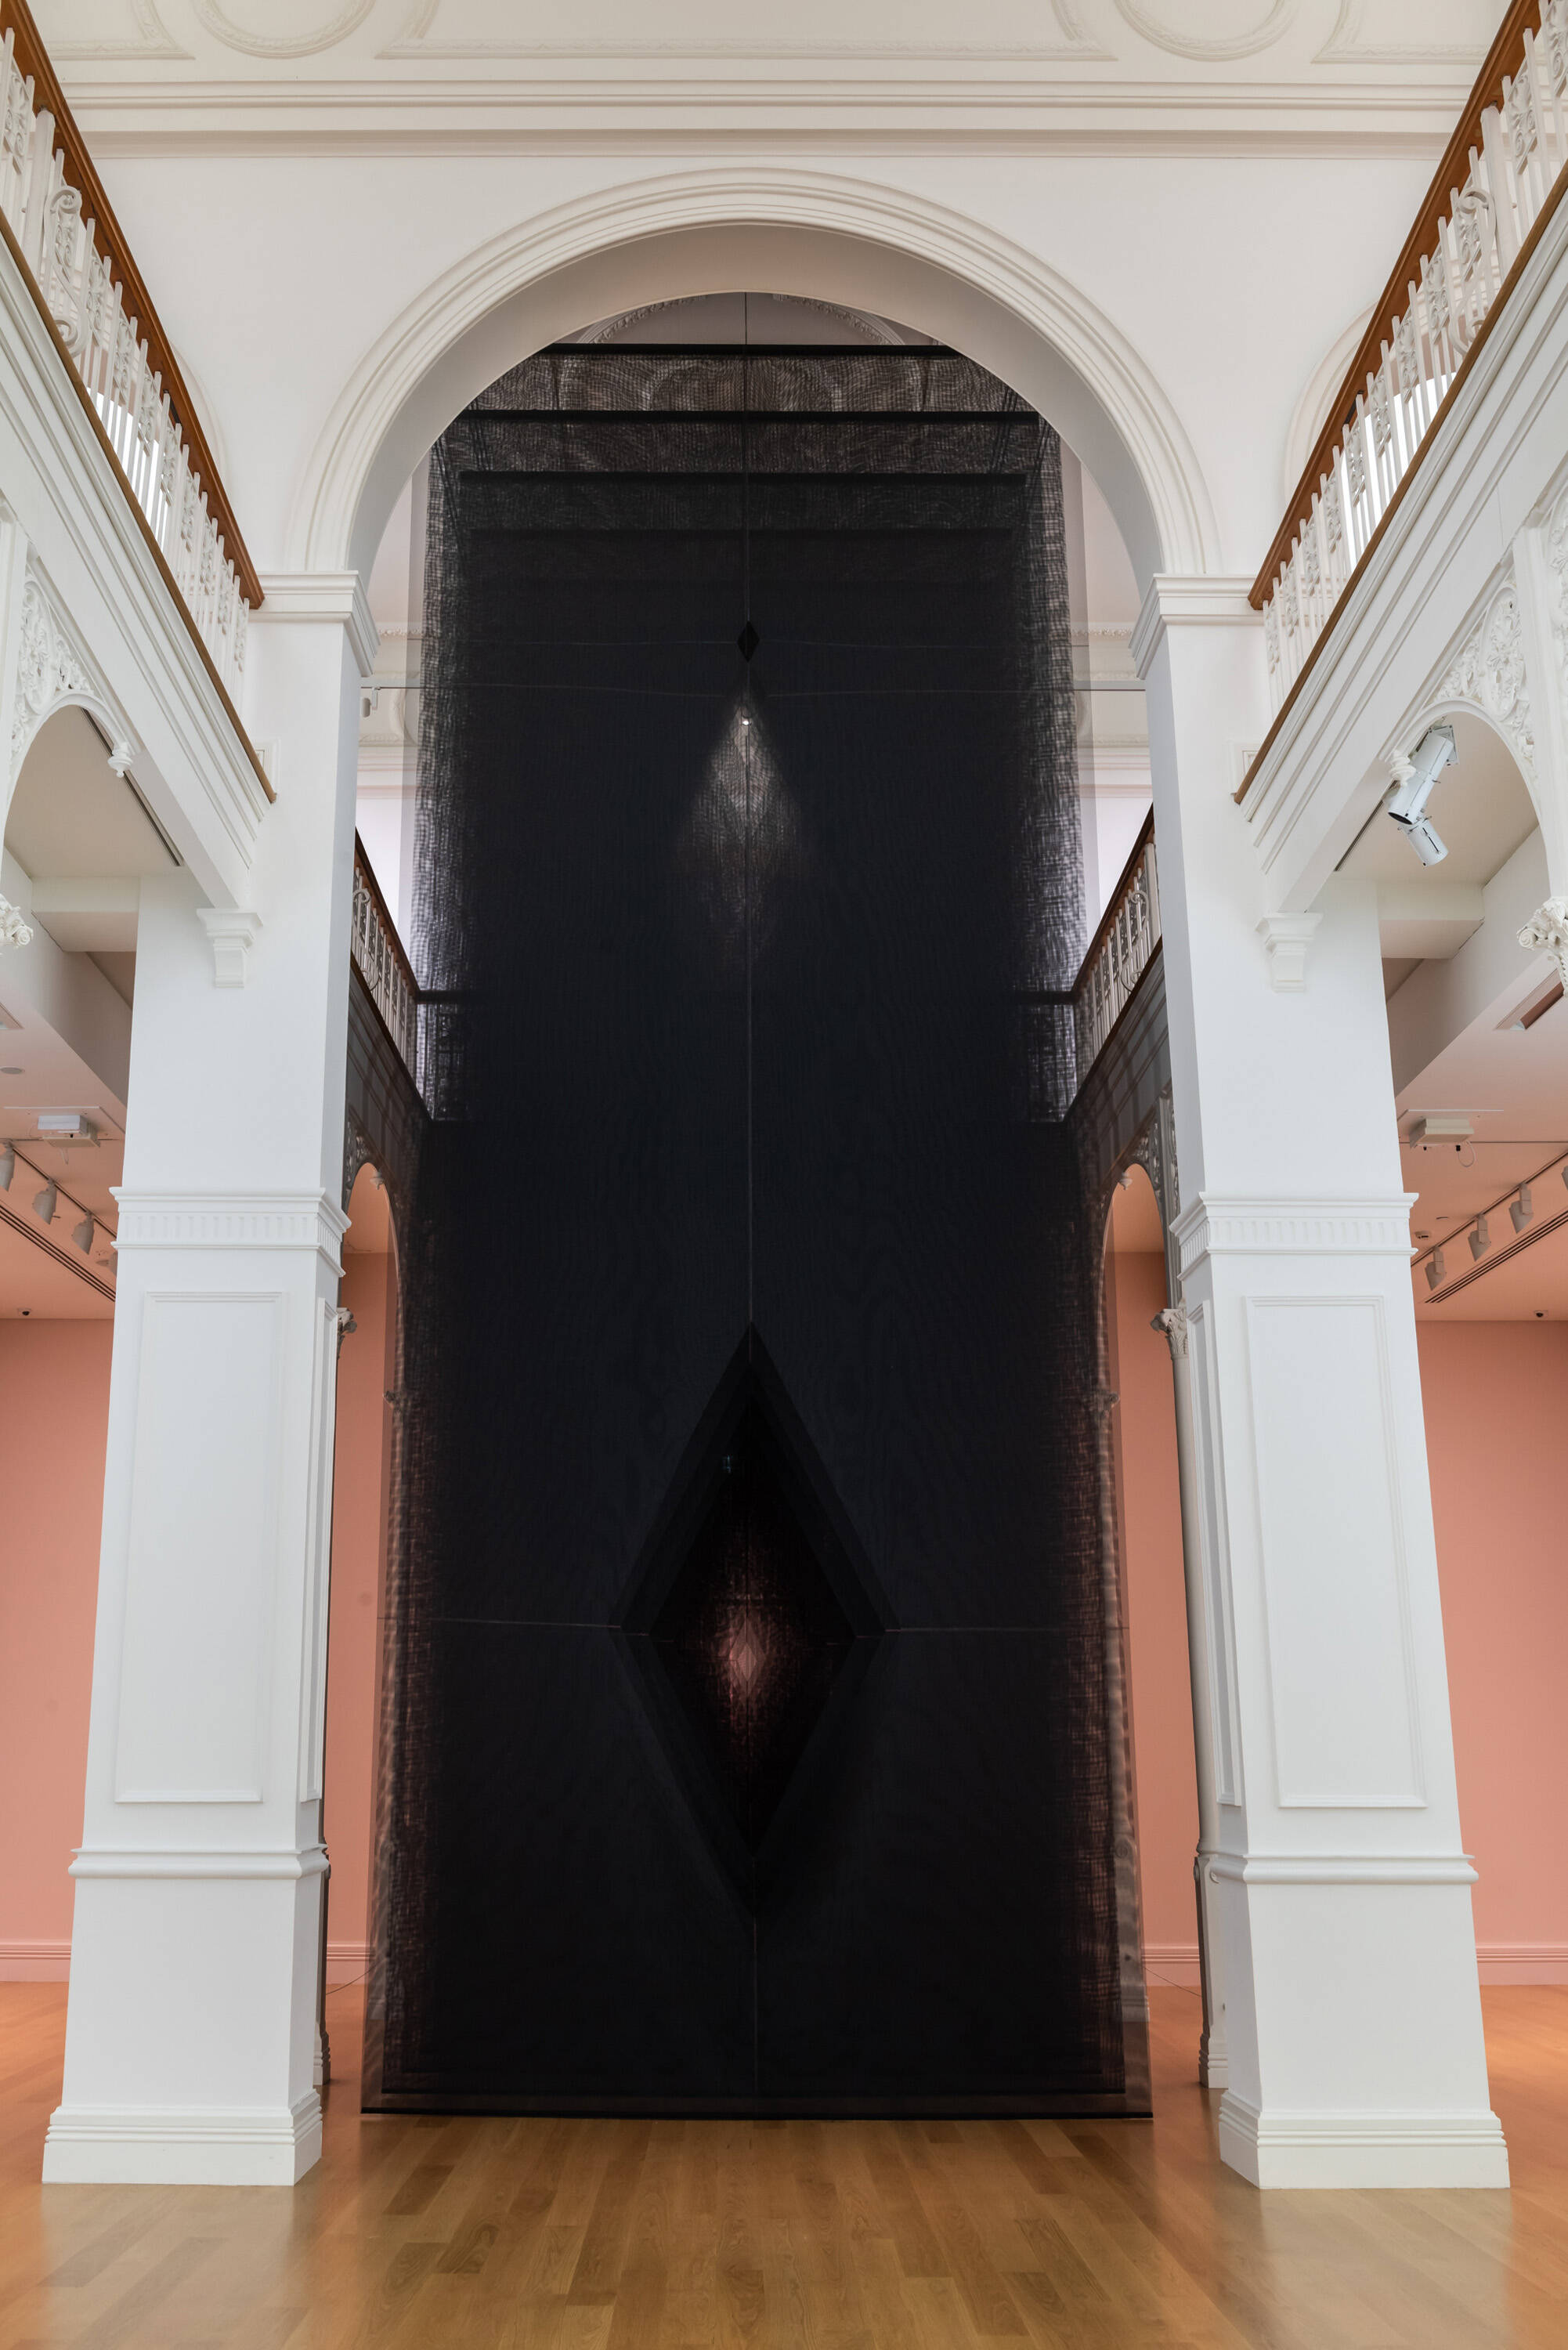 <p><strong>Mata Aho Collective and Maureen Lander&nbsp;</strong><em>Atapō</em> (installation view), 2020, winner of the 2021 Walters Prize</p>
